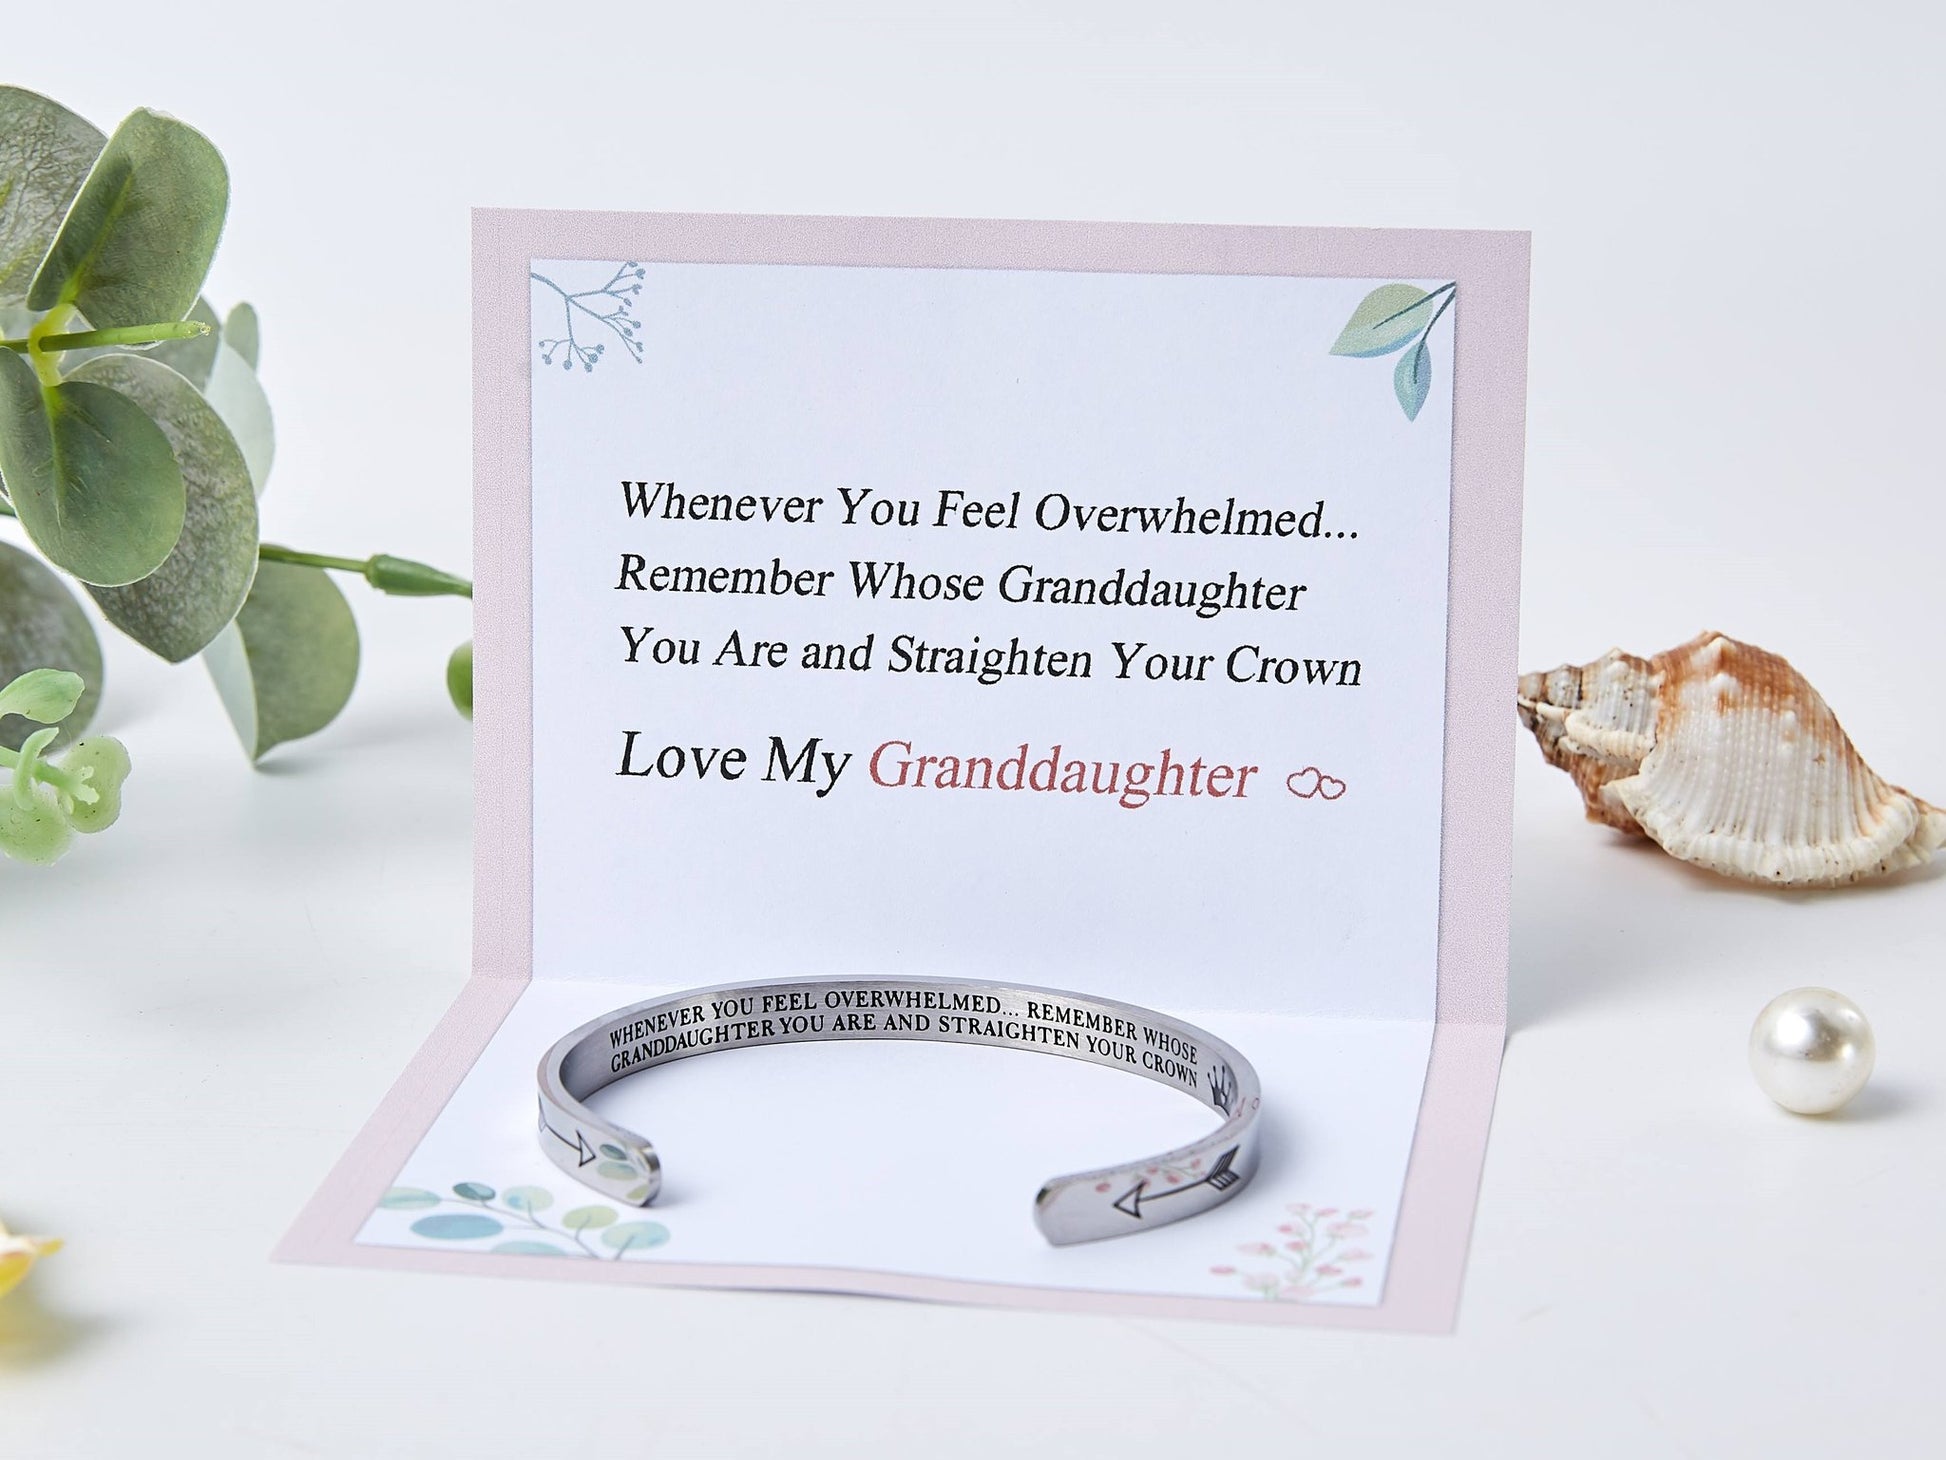 To My Granddaughter "WHENEVER YOU FEEL OVERWHELMED... REMEMBER WHOSE GRANDDAUGHTER YOU ARE AND STRAIGHTEN YOUR CROWN" Bracelet - SARAH'S WHISPER